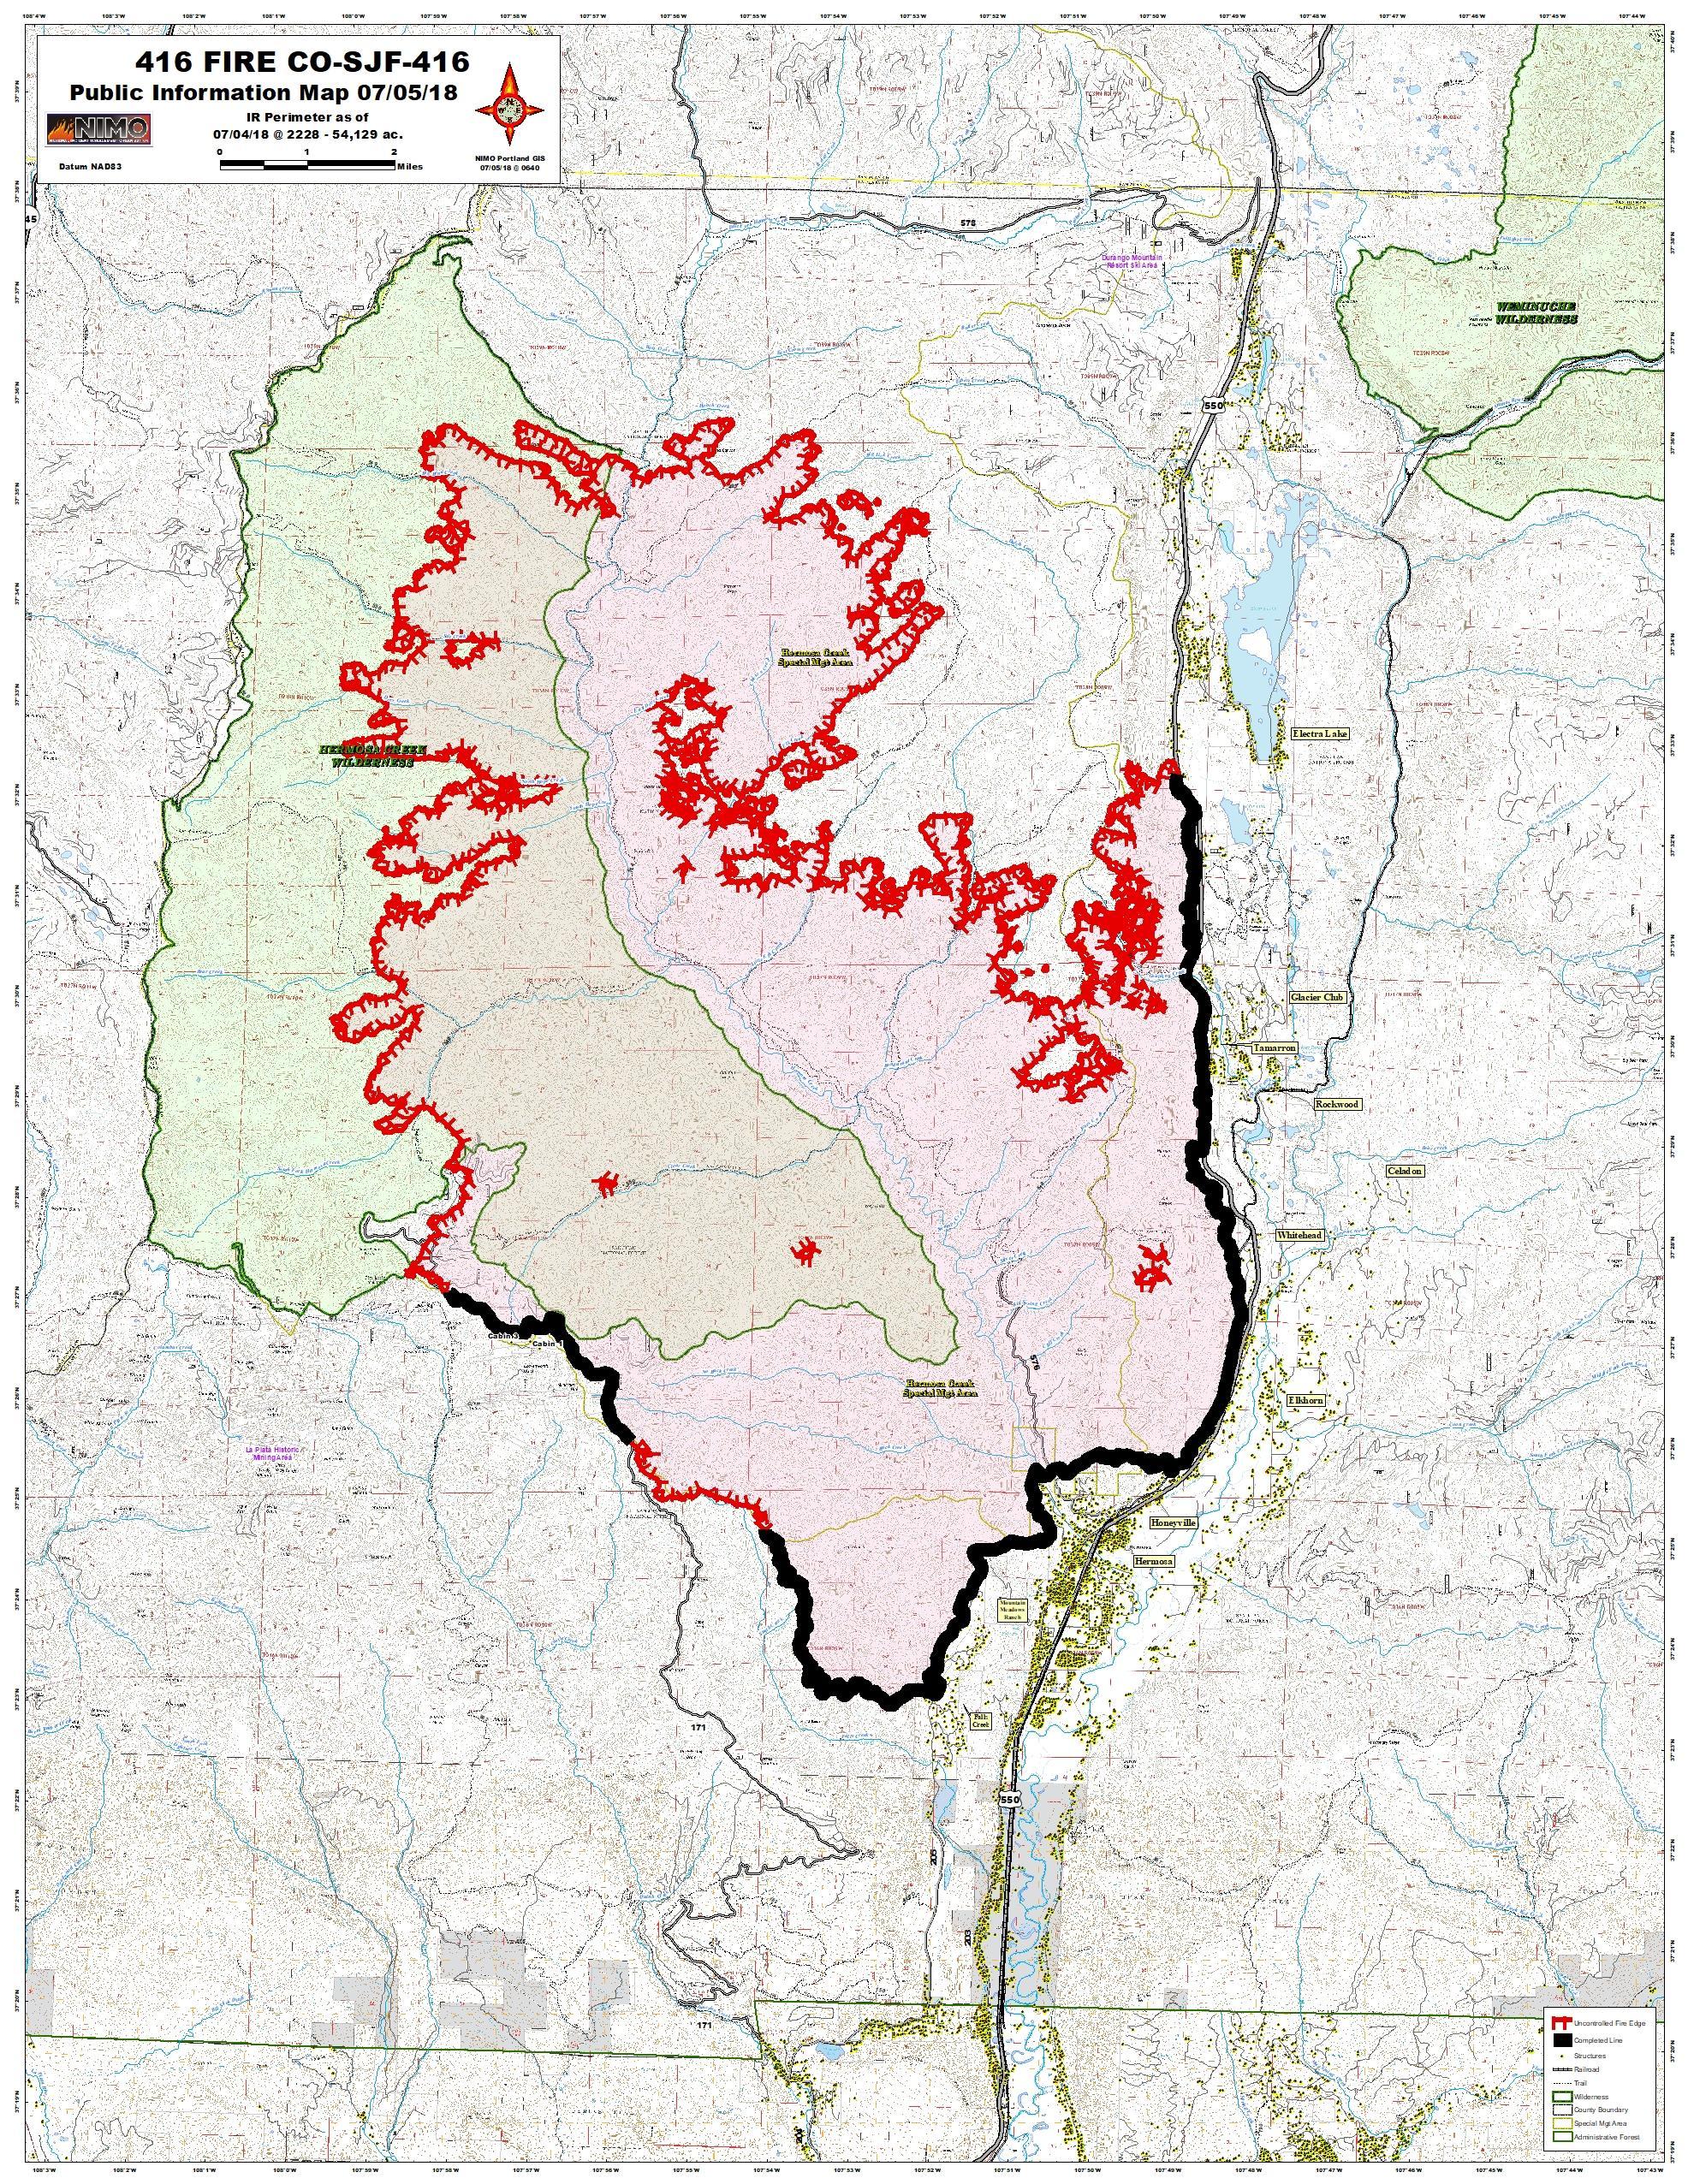 Colorado Fires June 2018 Maps Update On 416 Wildfire And Others